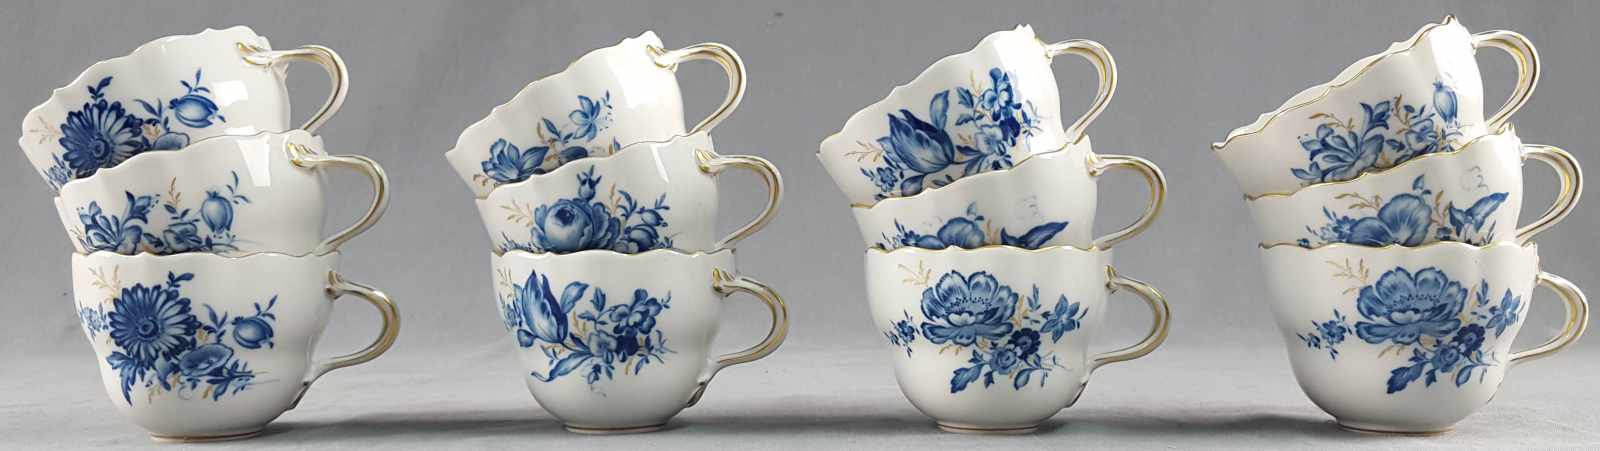 Coffee service Meissen porcelain for 12 persons. No coffee pot. - Image 4 of 19